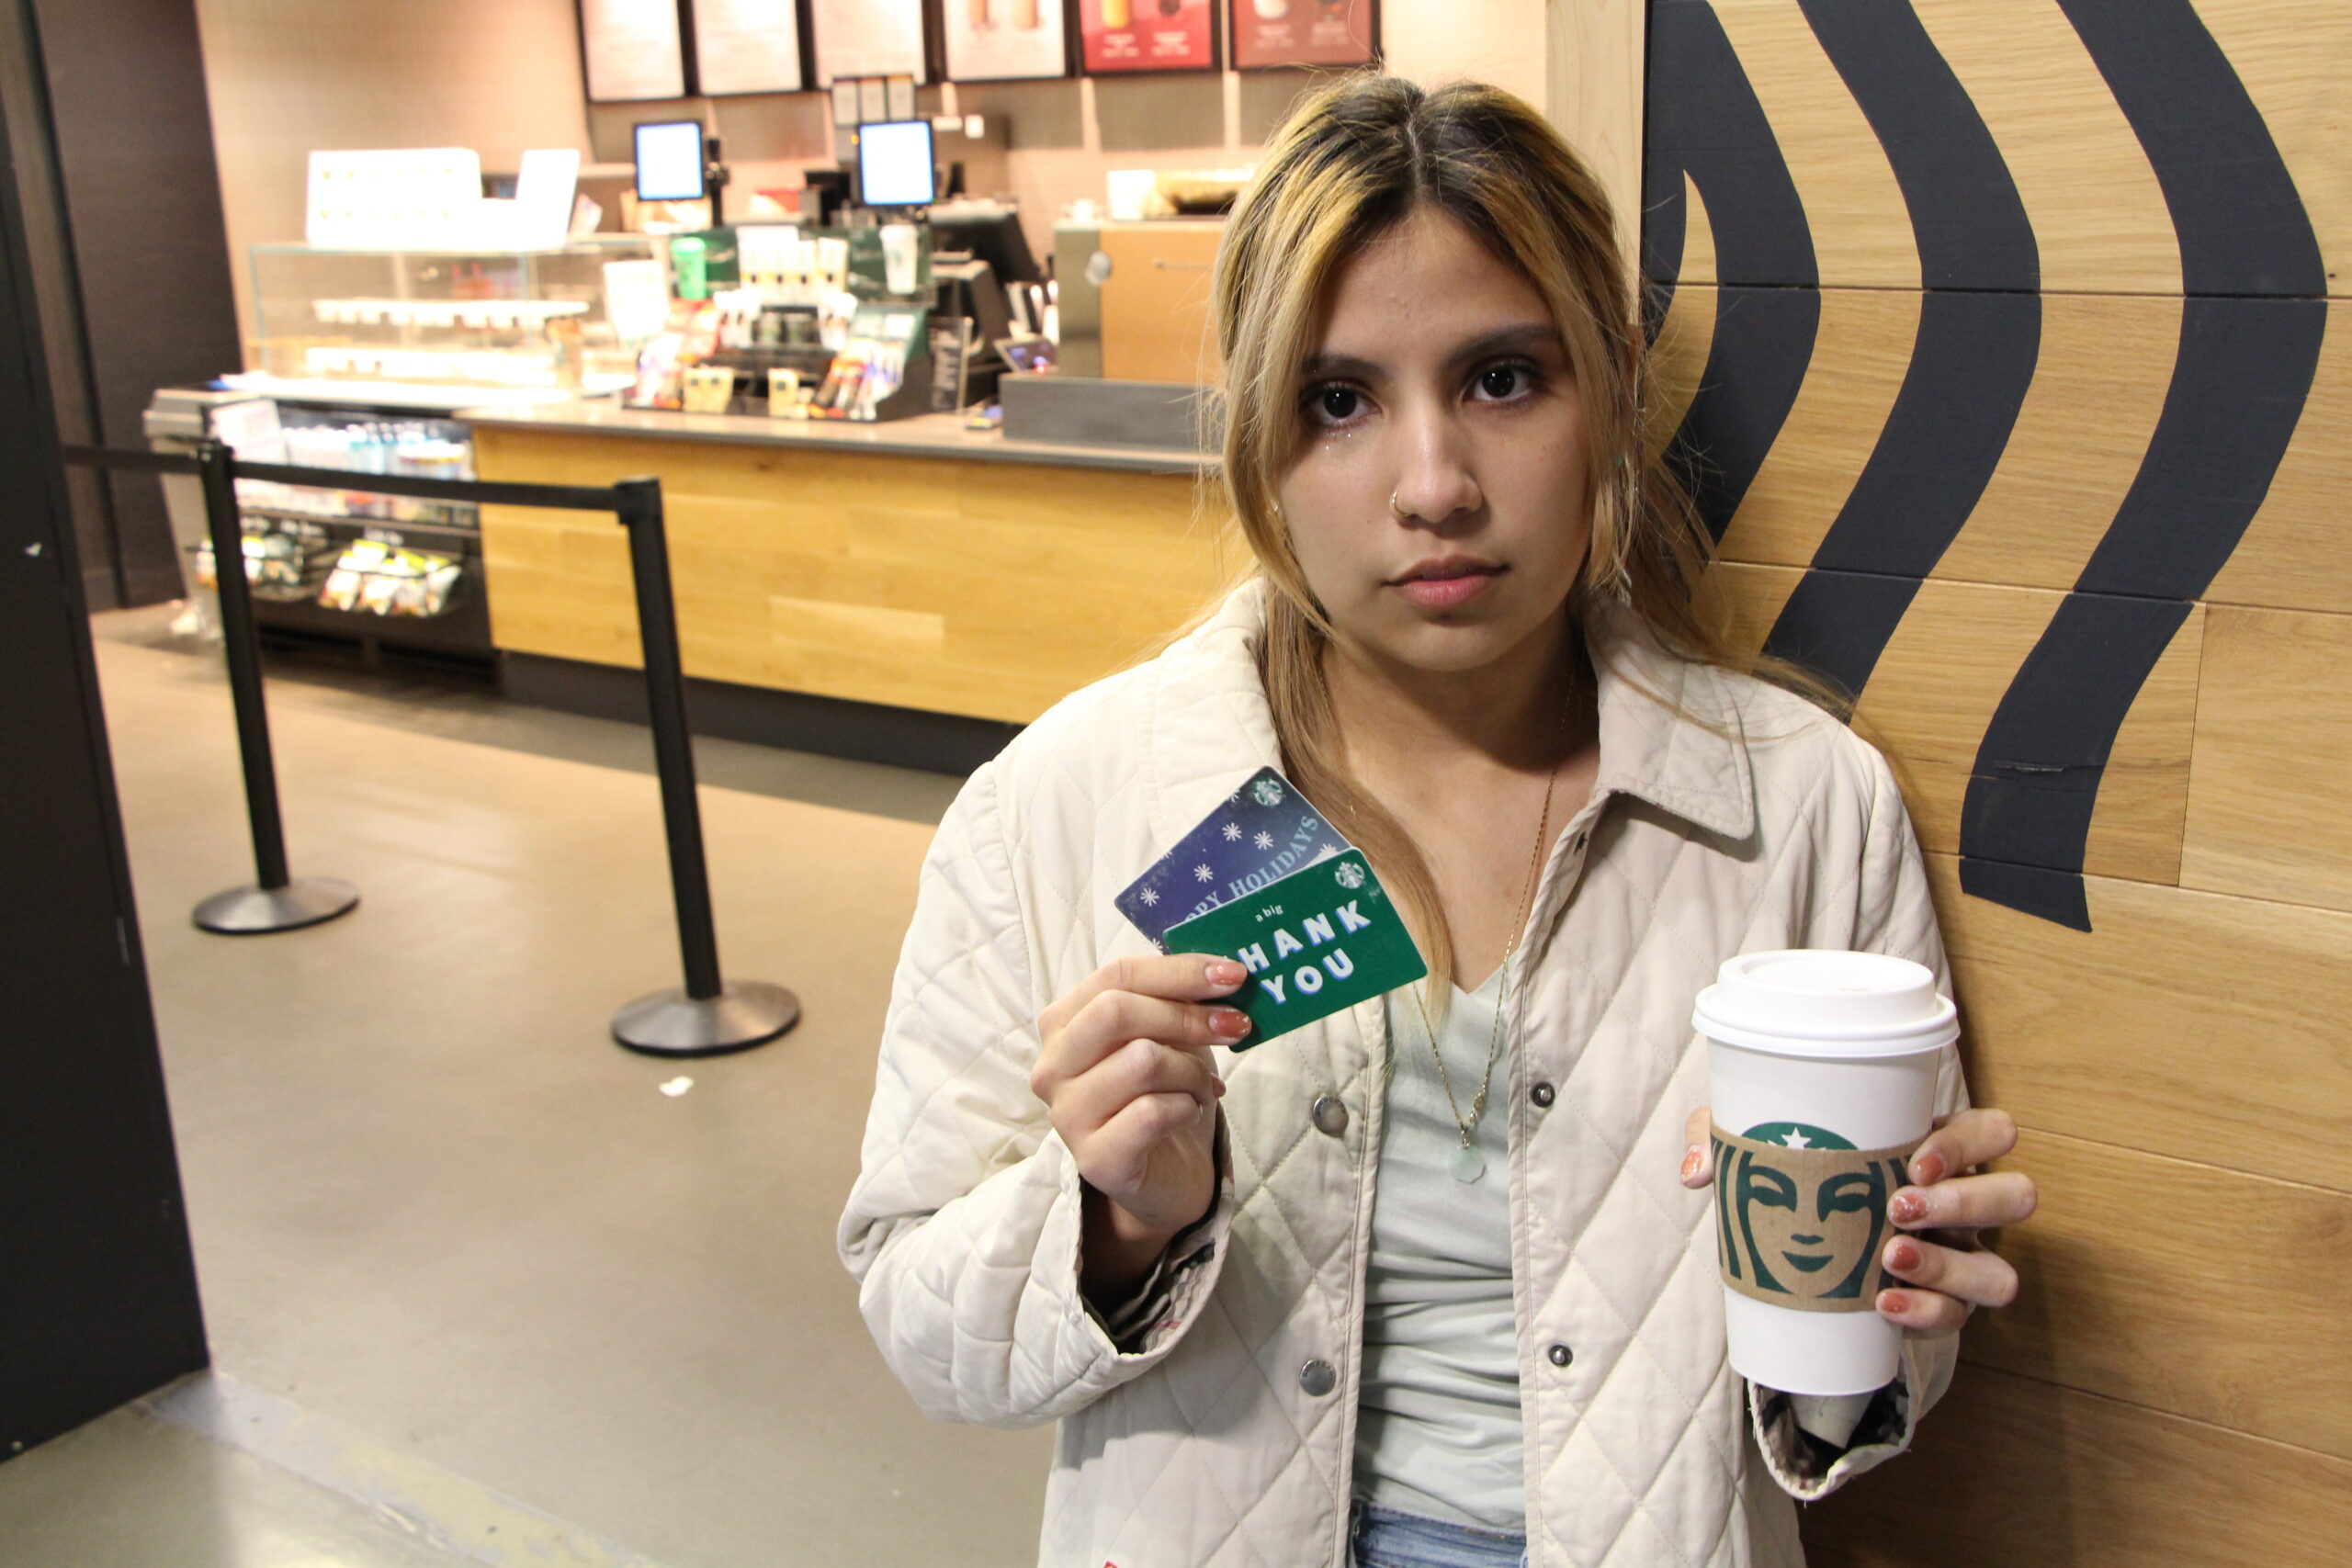 Naomi Damian stands in front of the campus Starbucks with gift cards in one hand and a Starbucks cup in the other.